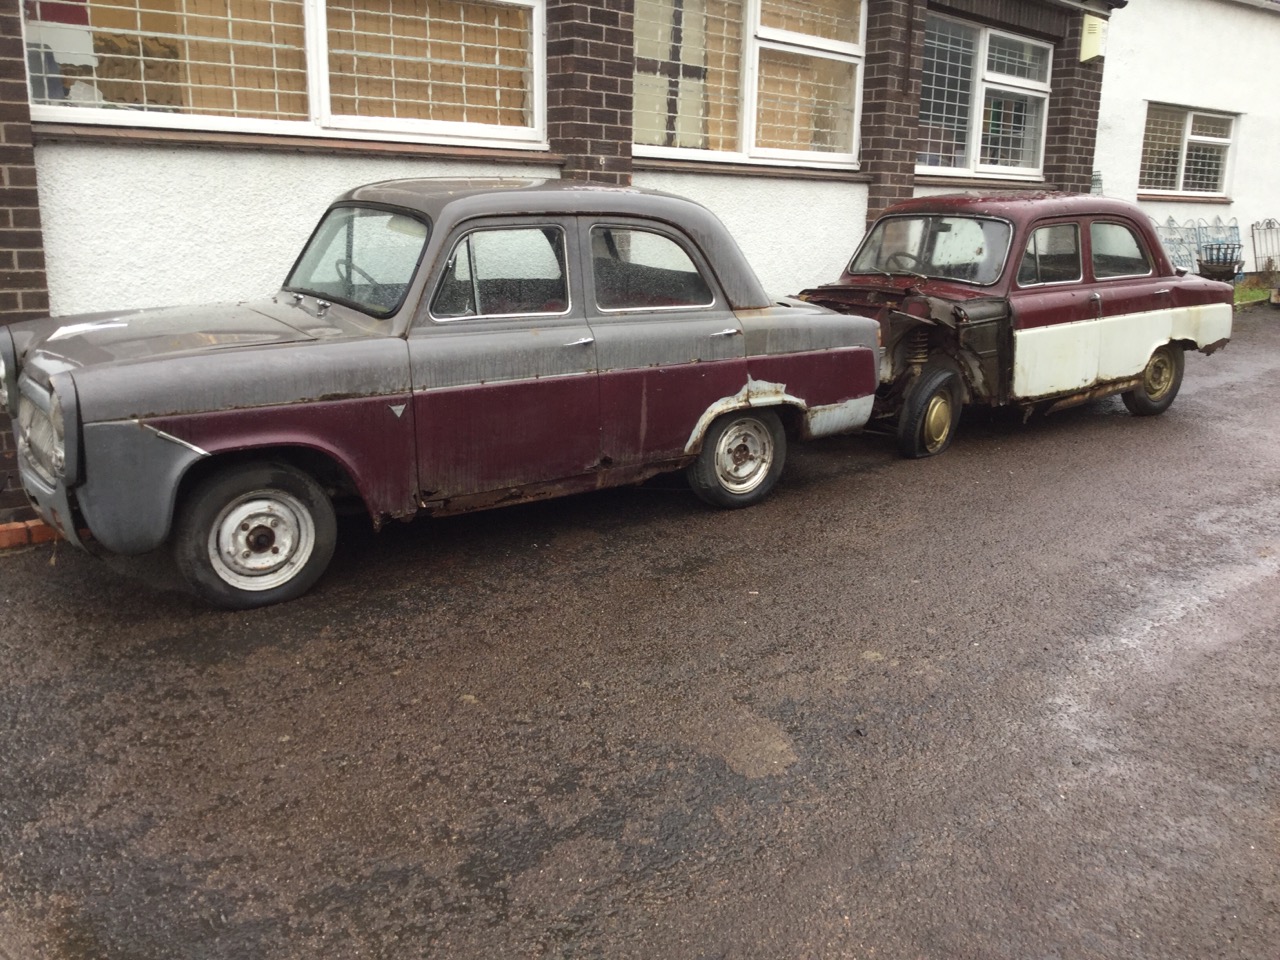 A 1960 Ford Prefect saloon, the 997cc car with V5C registration certificate - was a runner! (